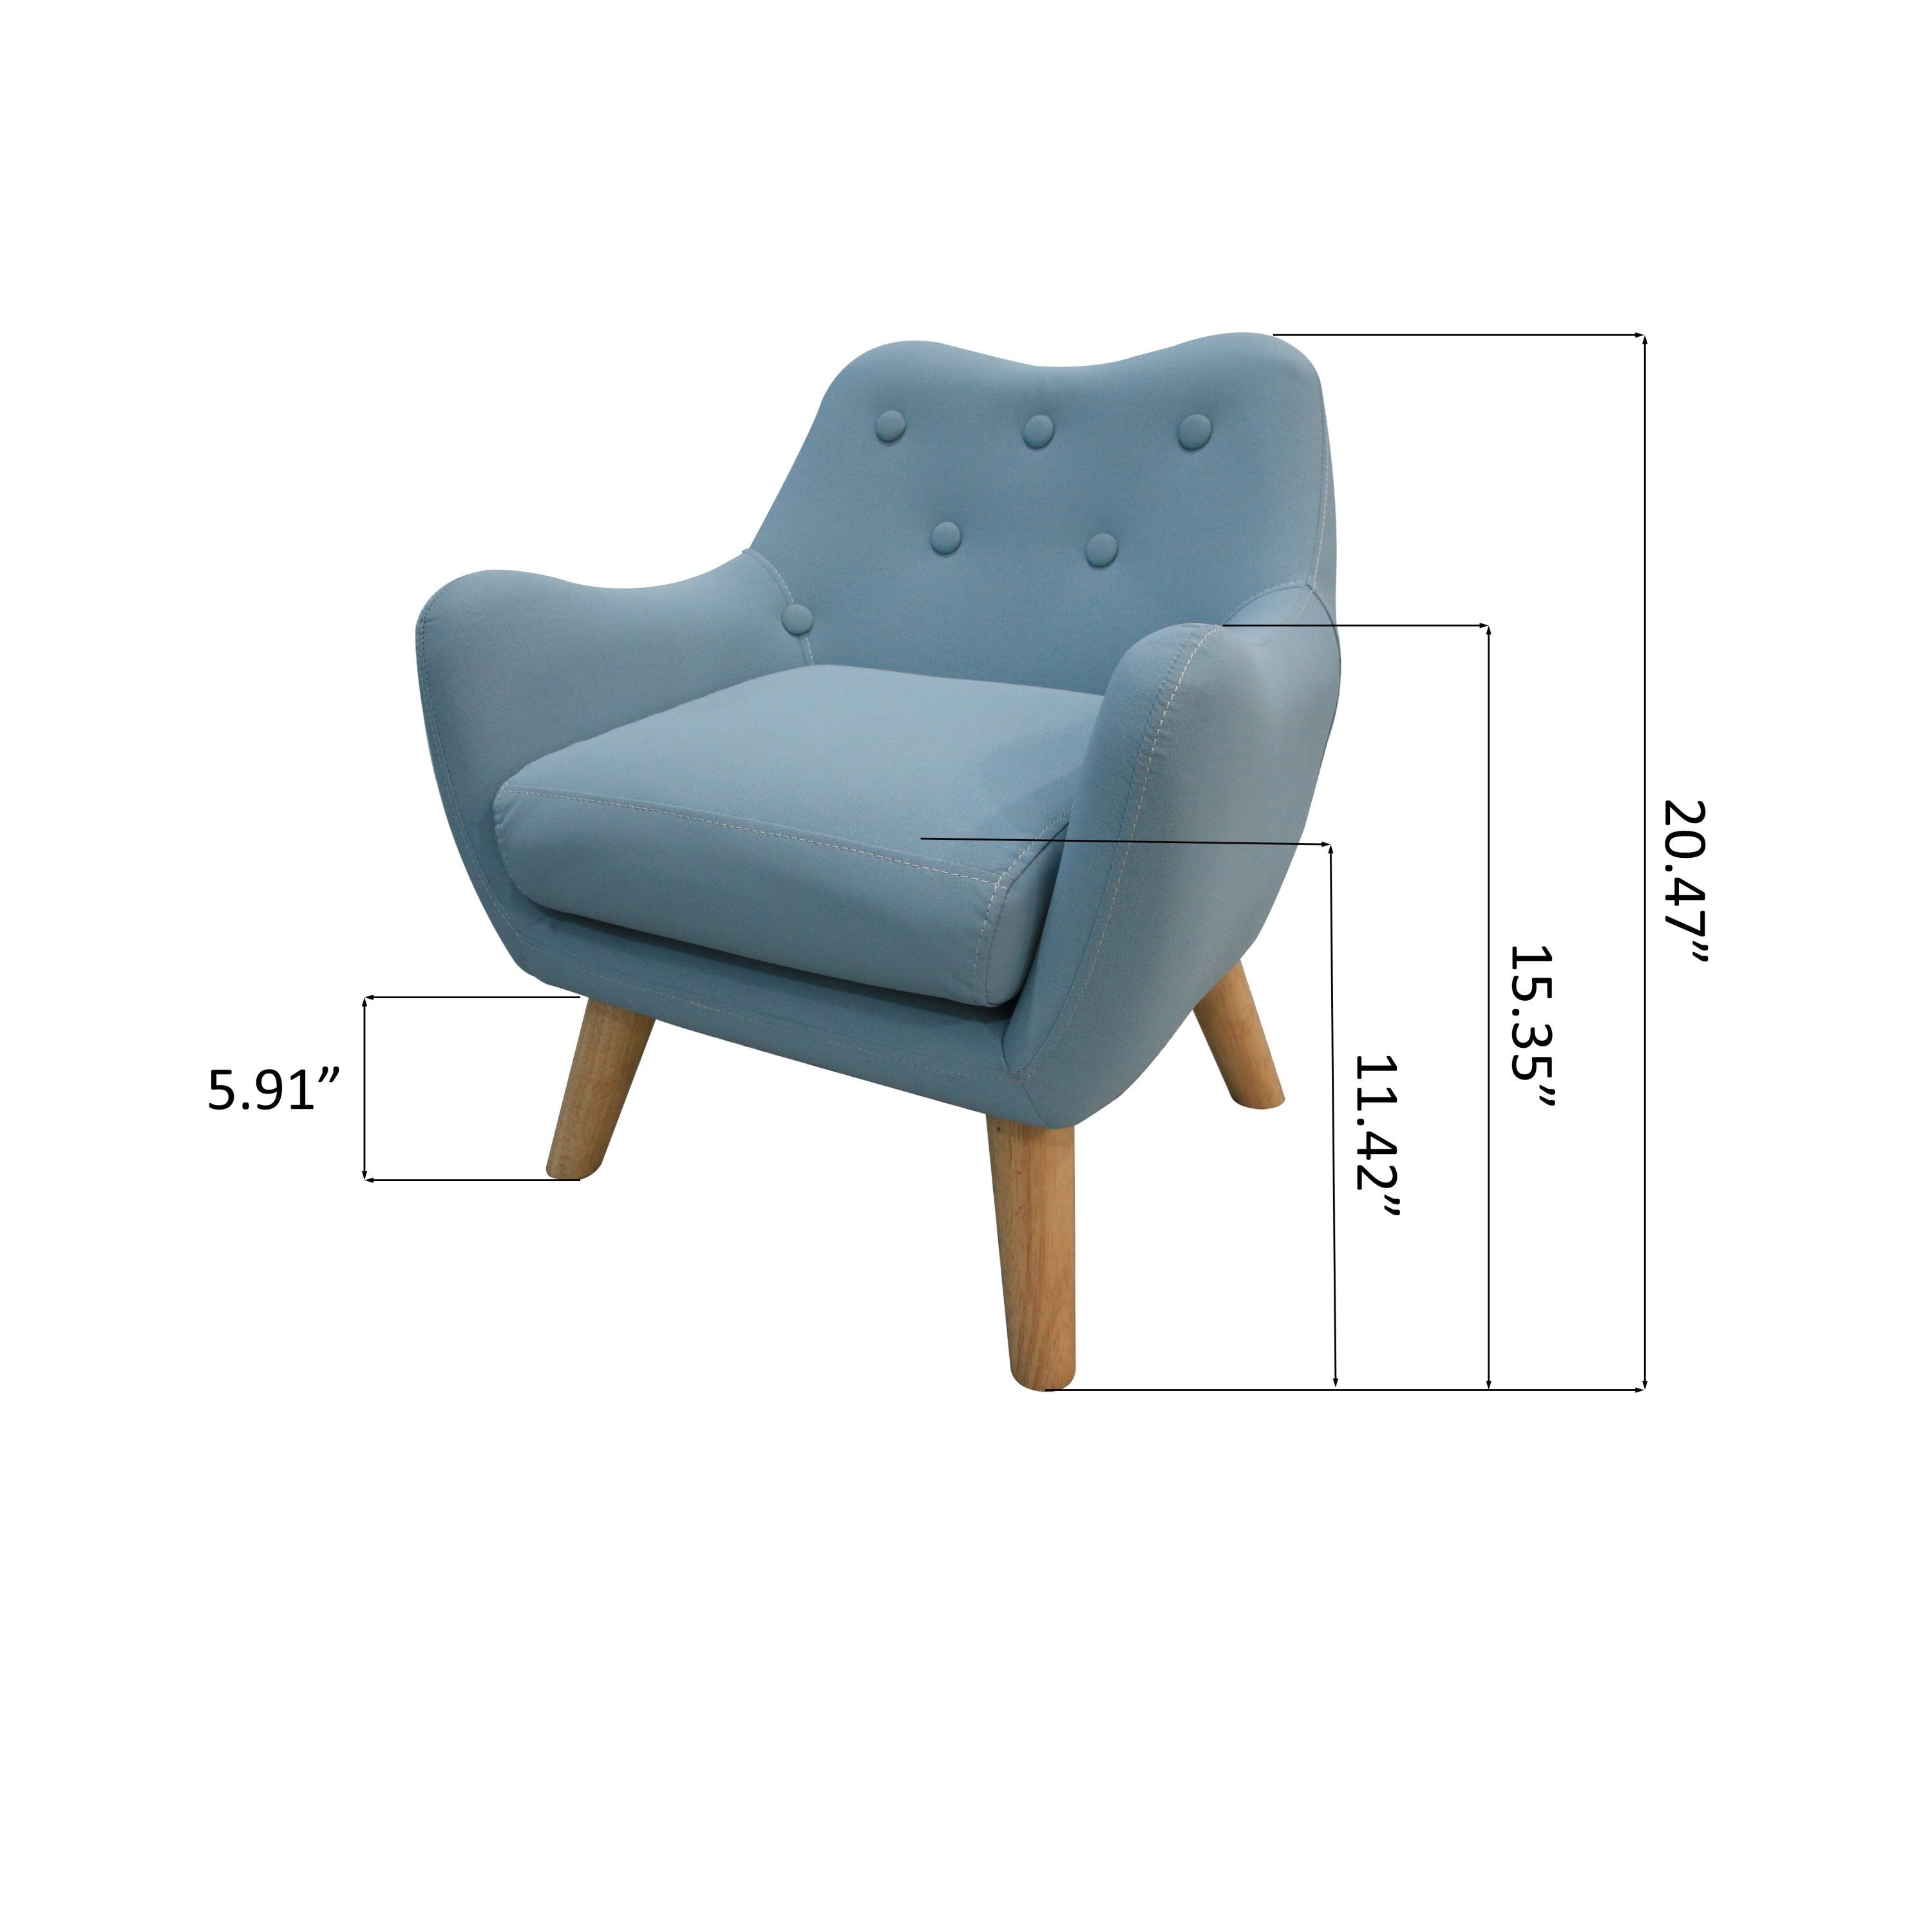 Microfibres Fabric Upholstered Child Accent Armchair with Wooden Legs